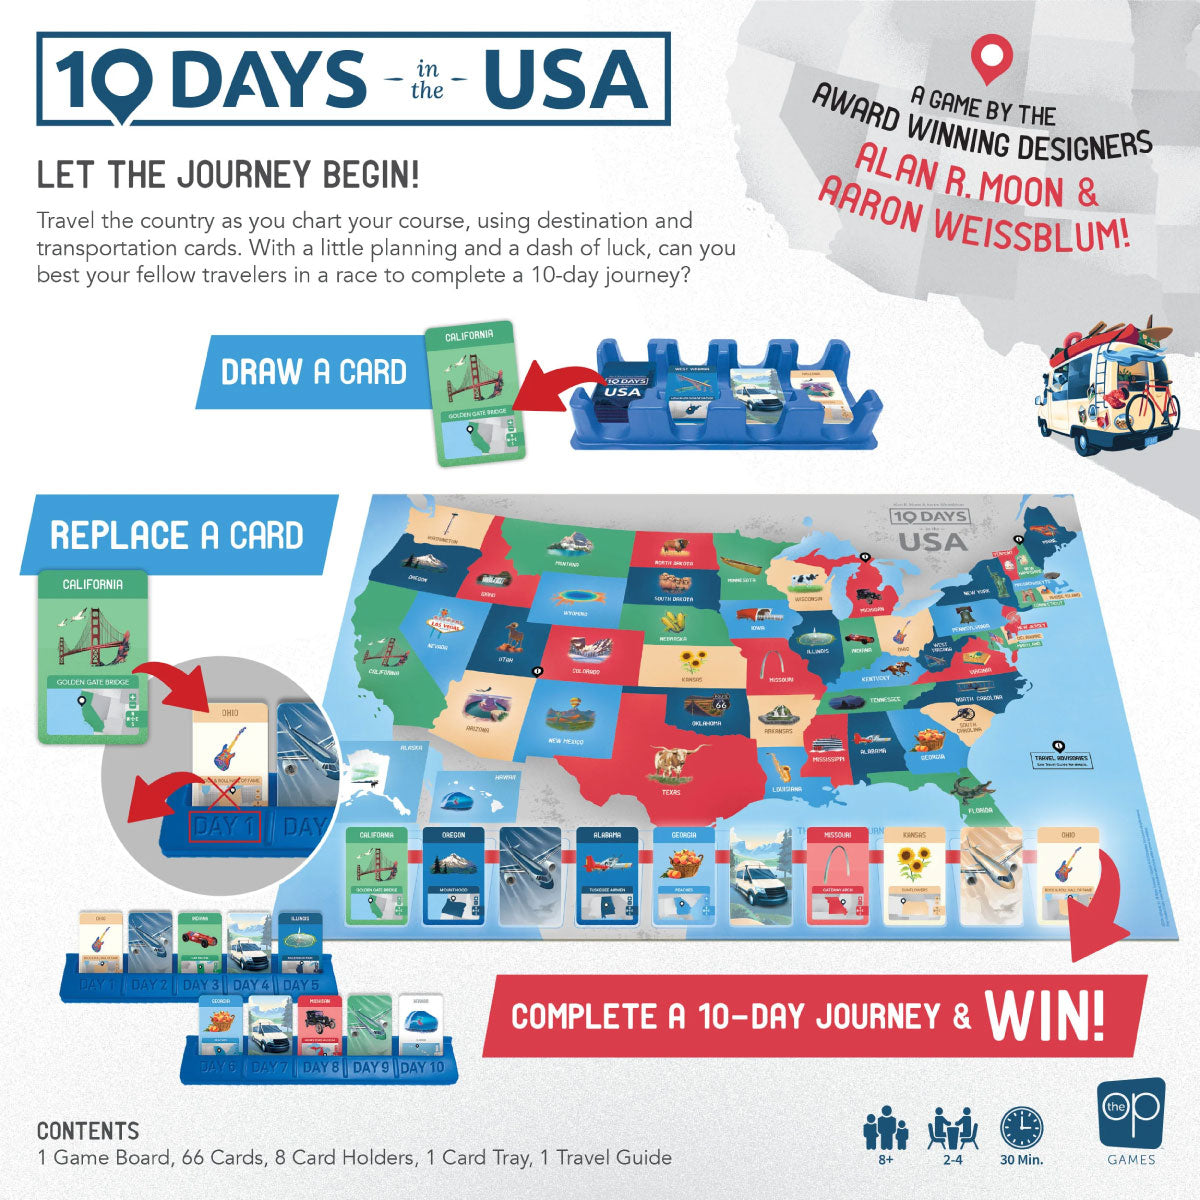 10 Days in the USA from The OP